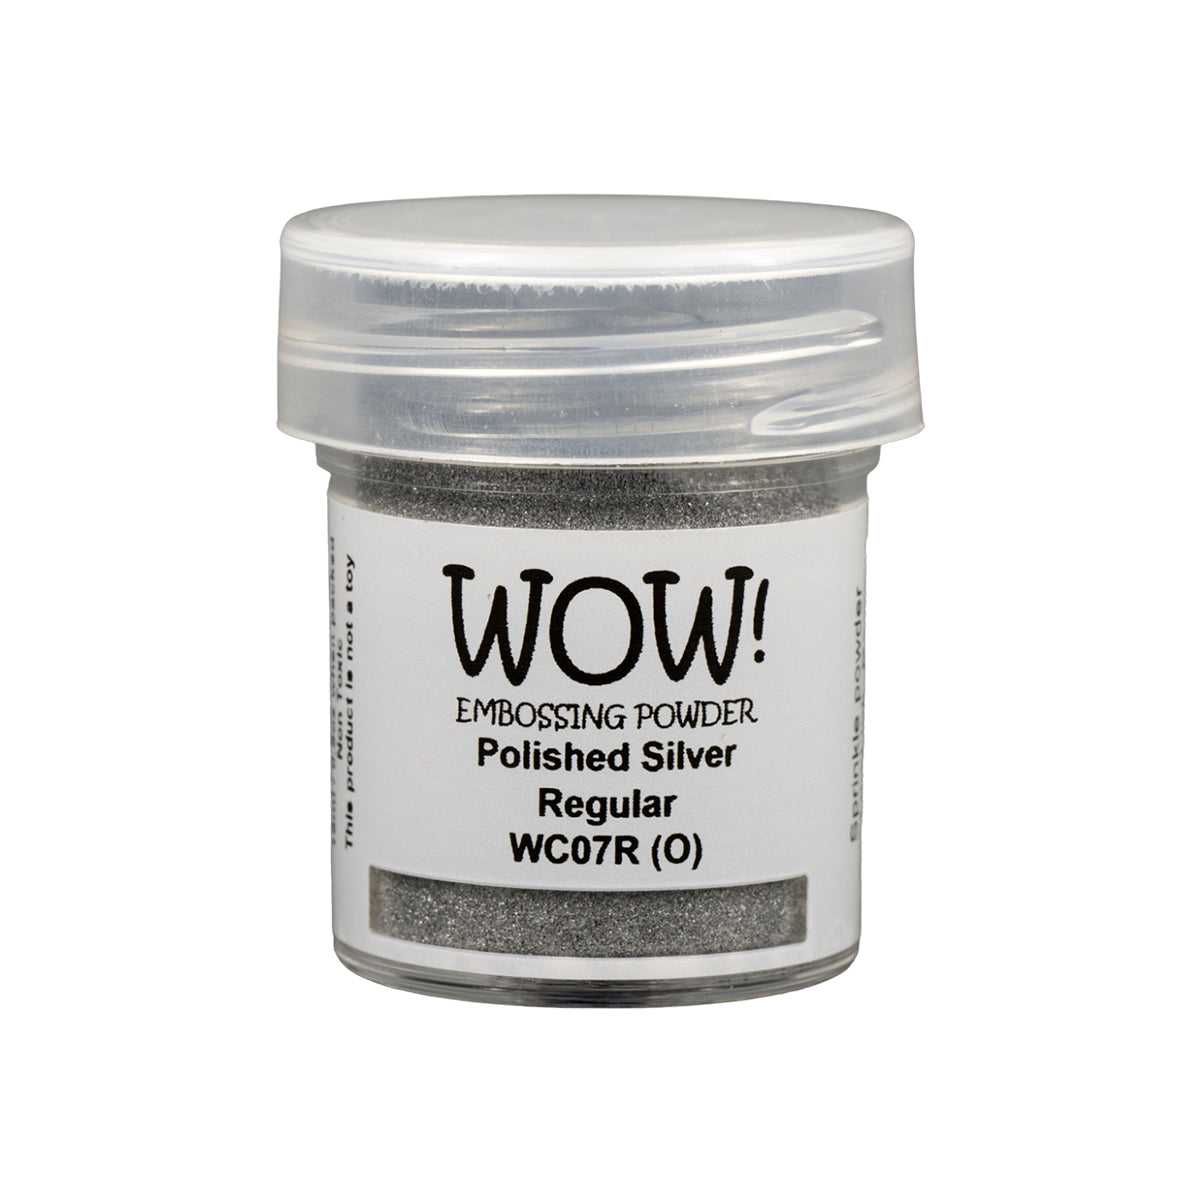 Wow! Embossing Powder - Polished Silver